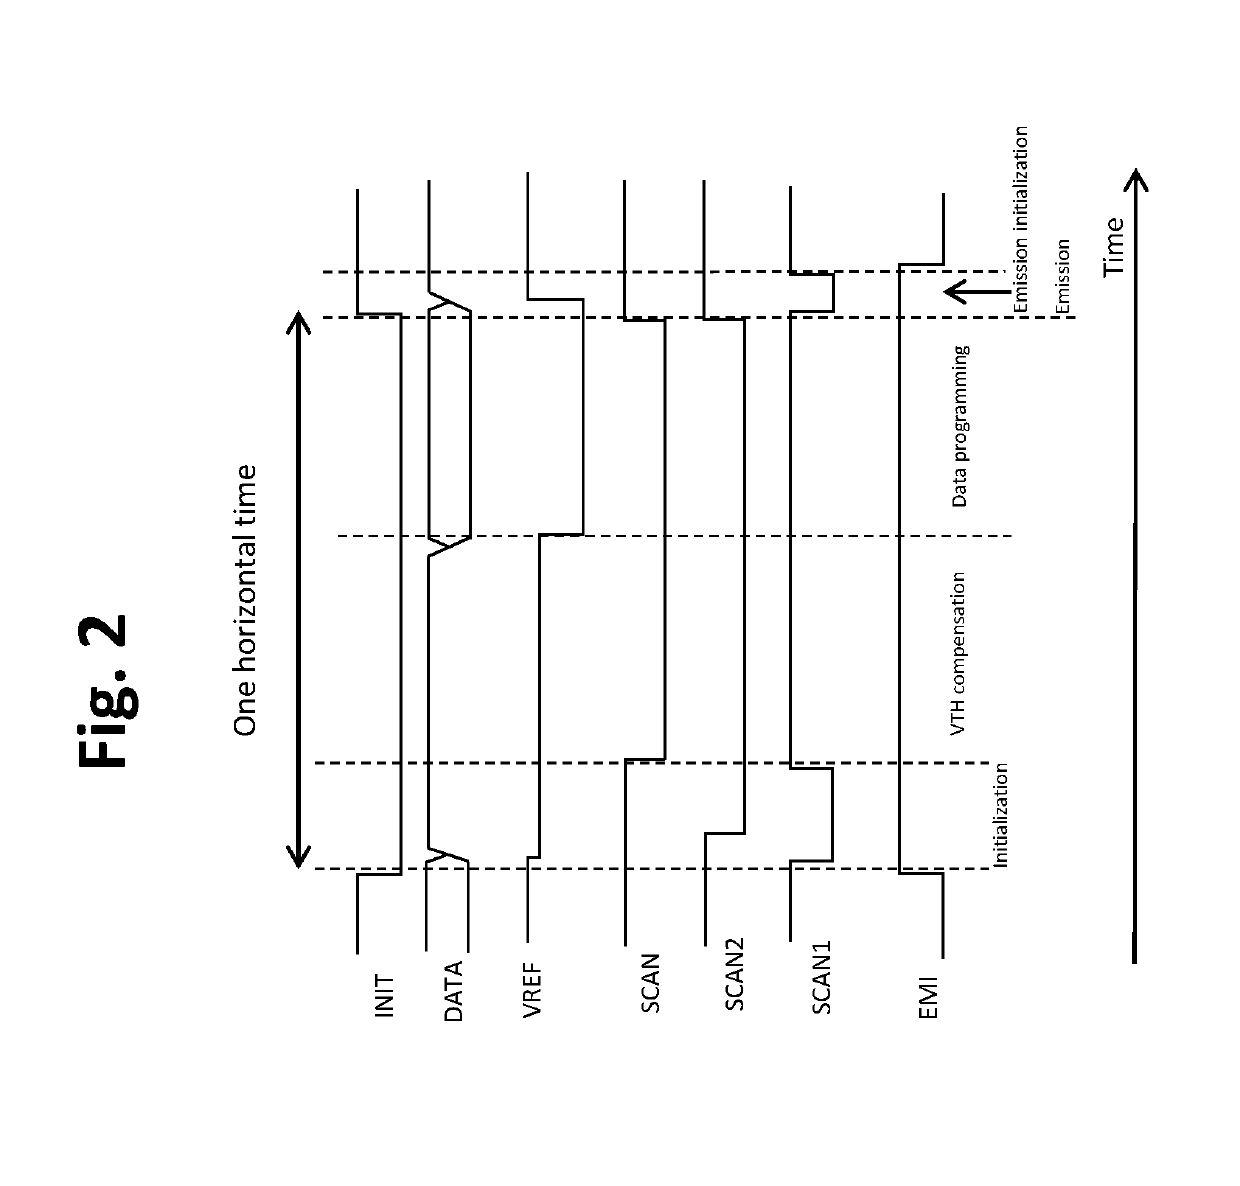 TFT pixel threshold voltage compensation circuit with light-emitting device initialization